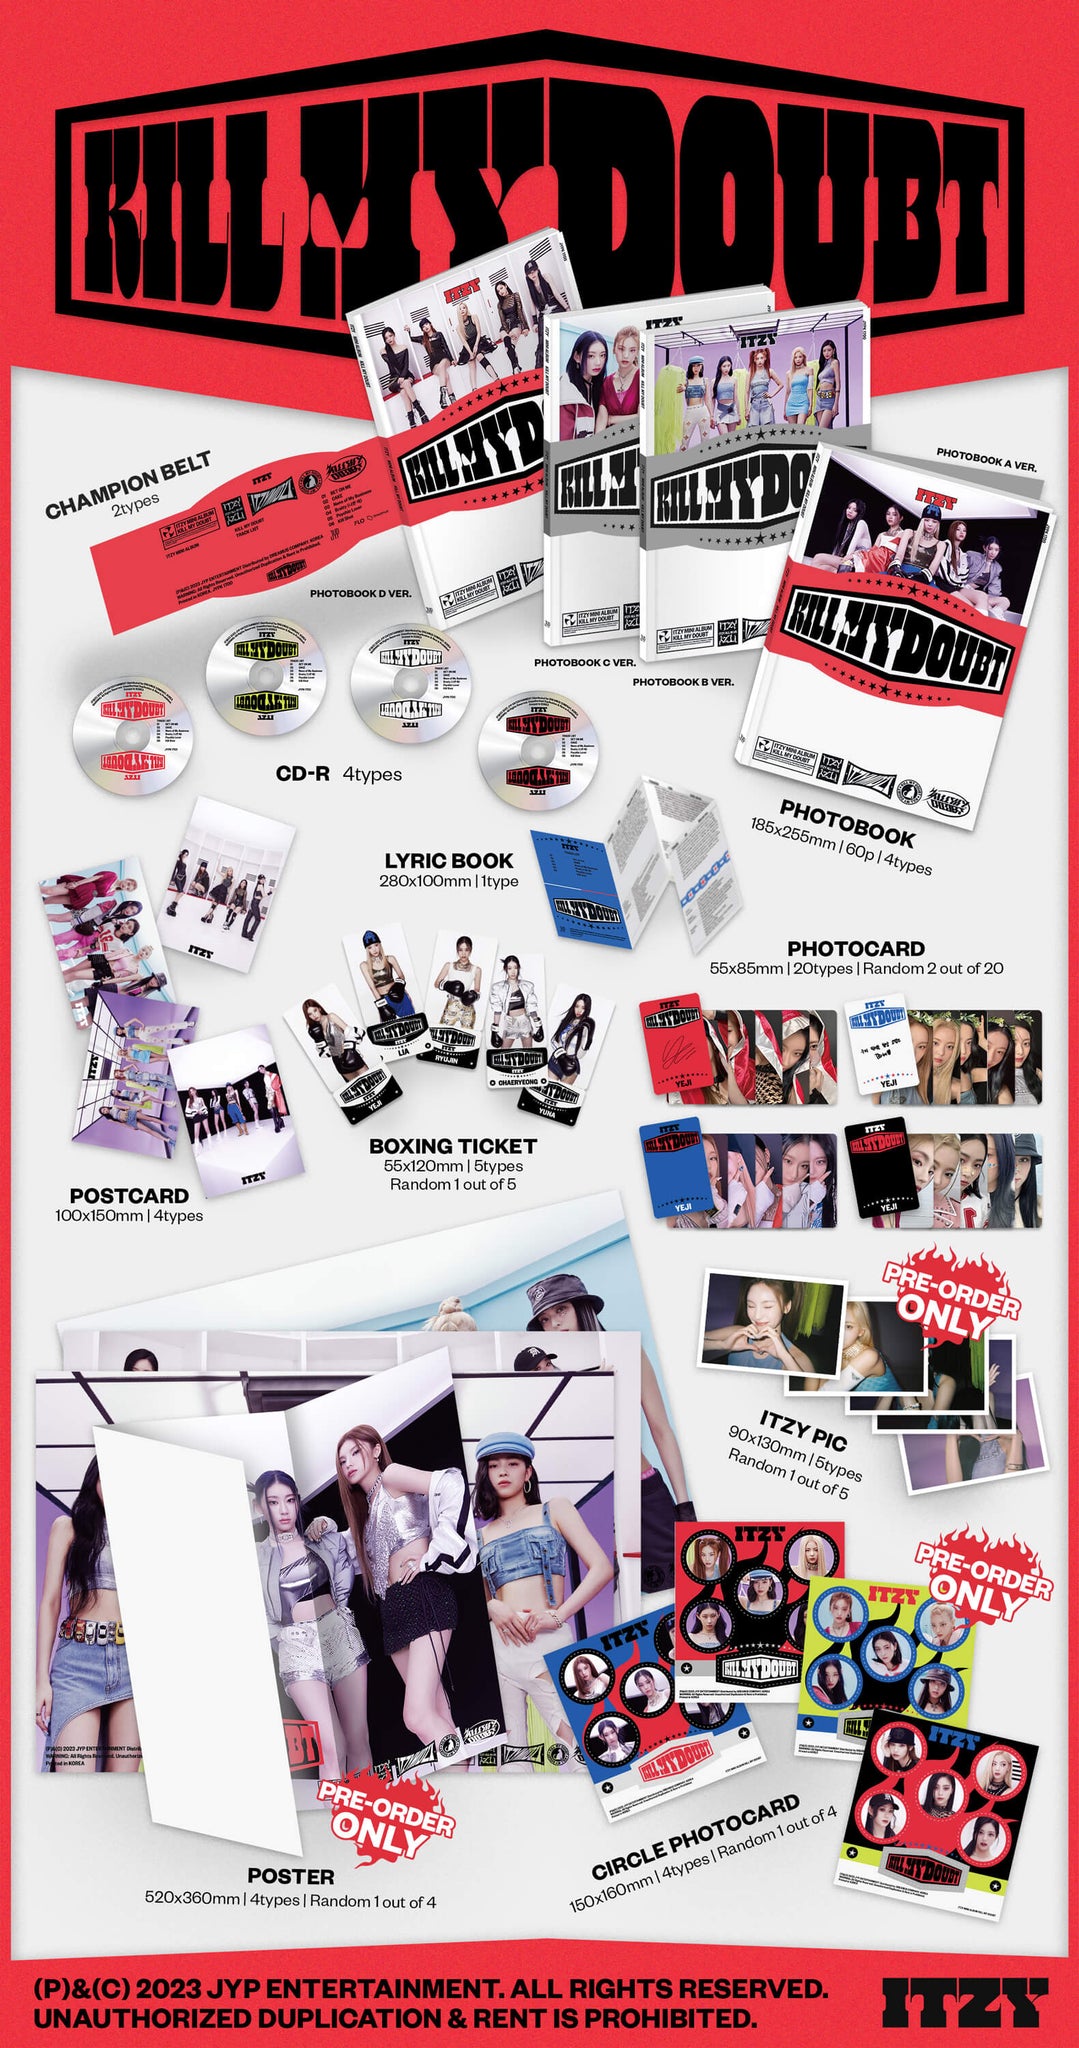  ITZY KILL MY DOUBT (Standard Edition) Inclusions Photobook Champion Belt CD Lyric Book Postcard Boxing Ticket Photocards Pre-order Only ITZY Pic Circle Photocard Poster